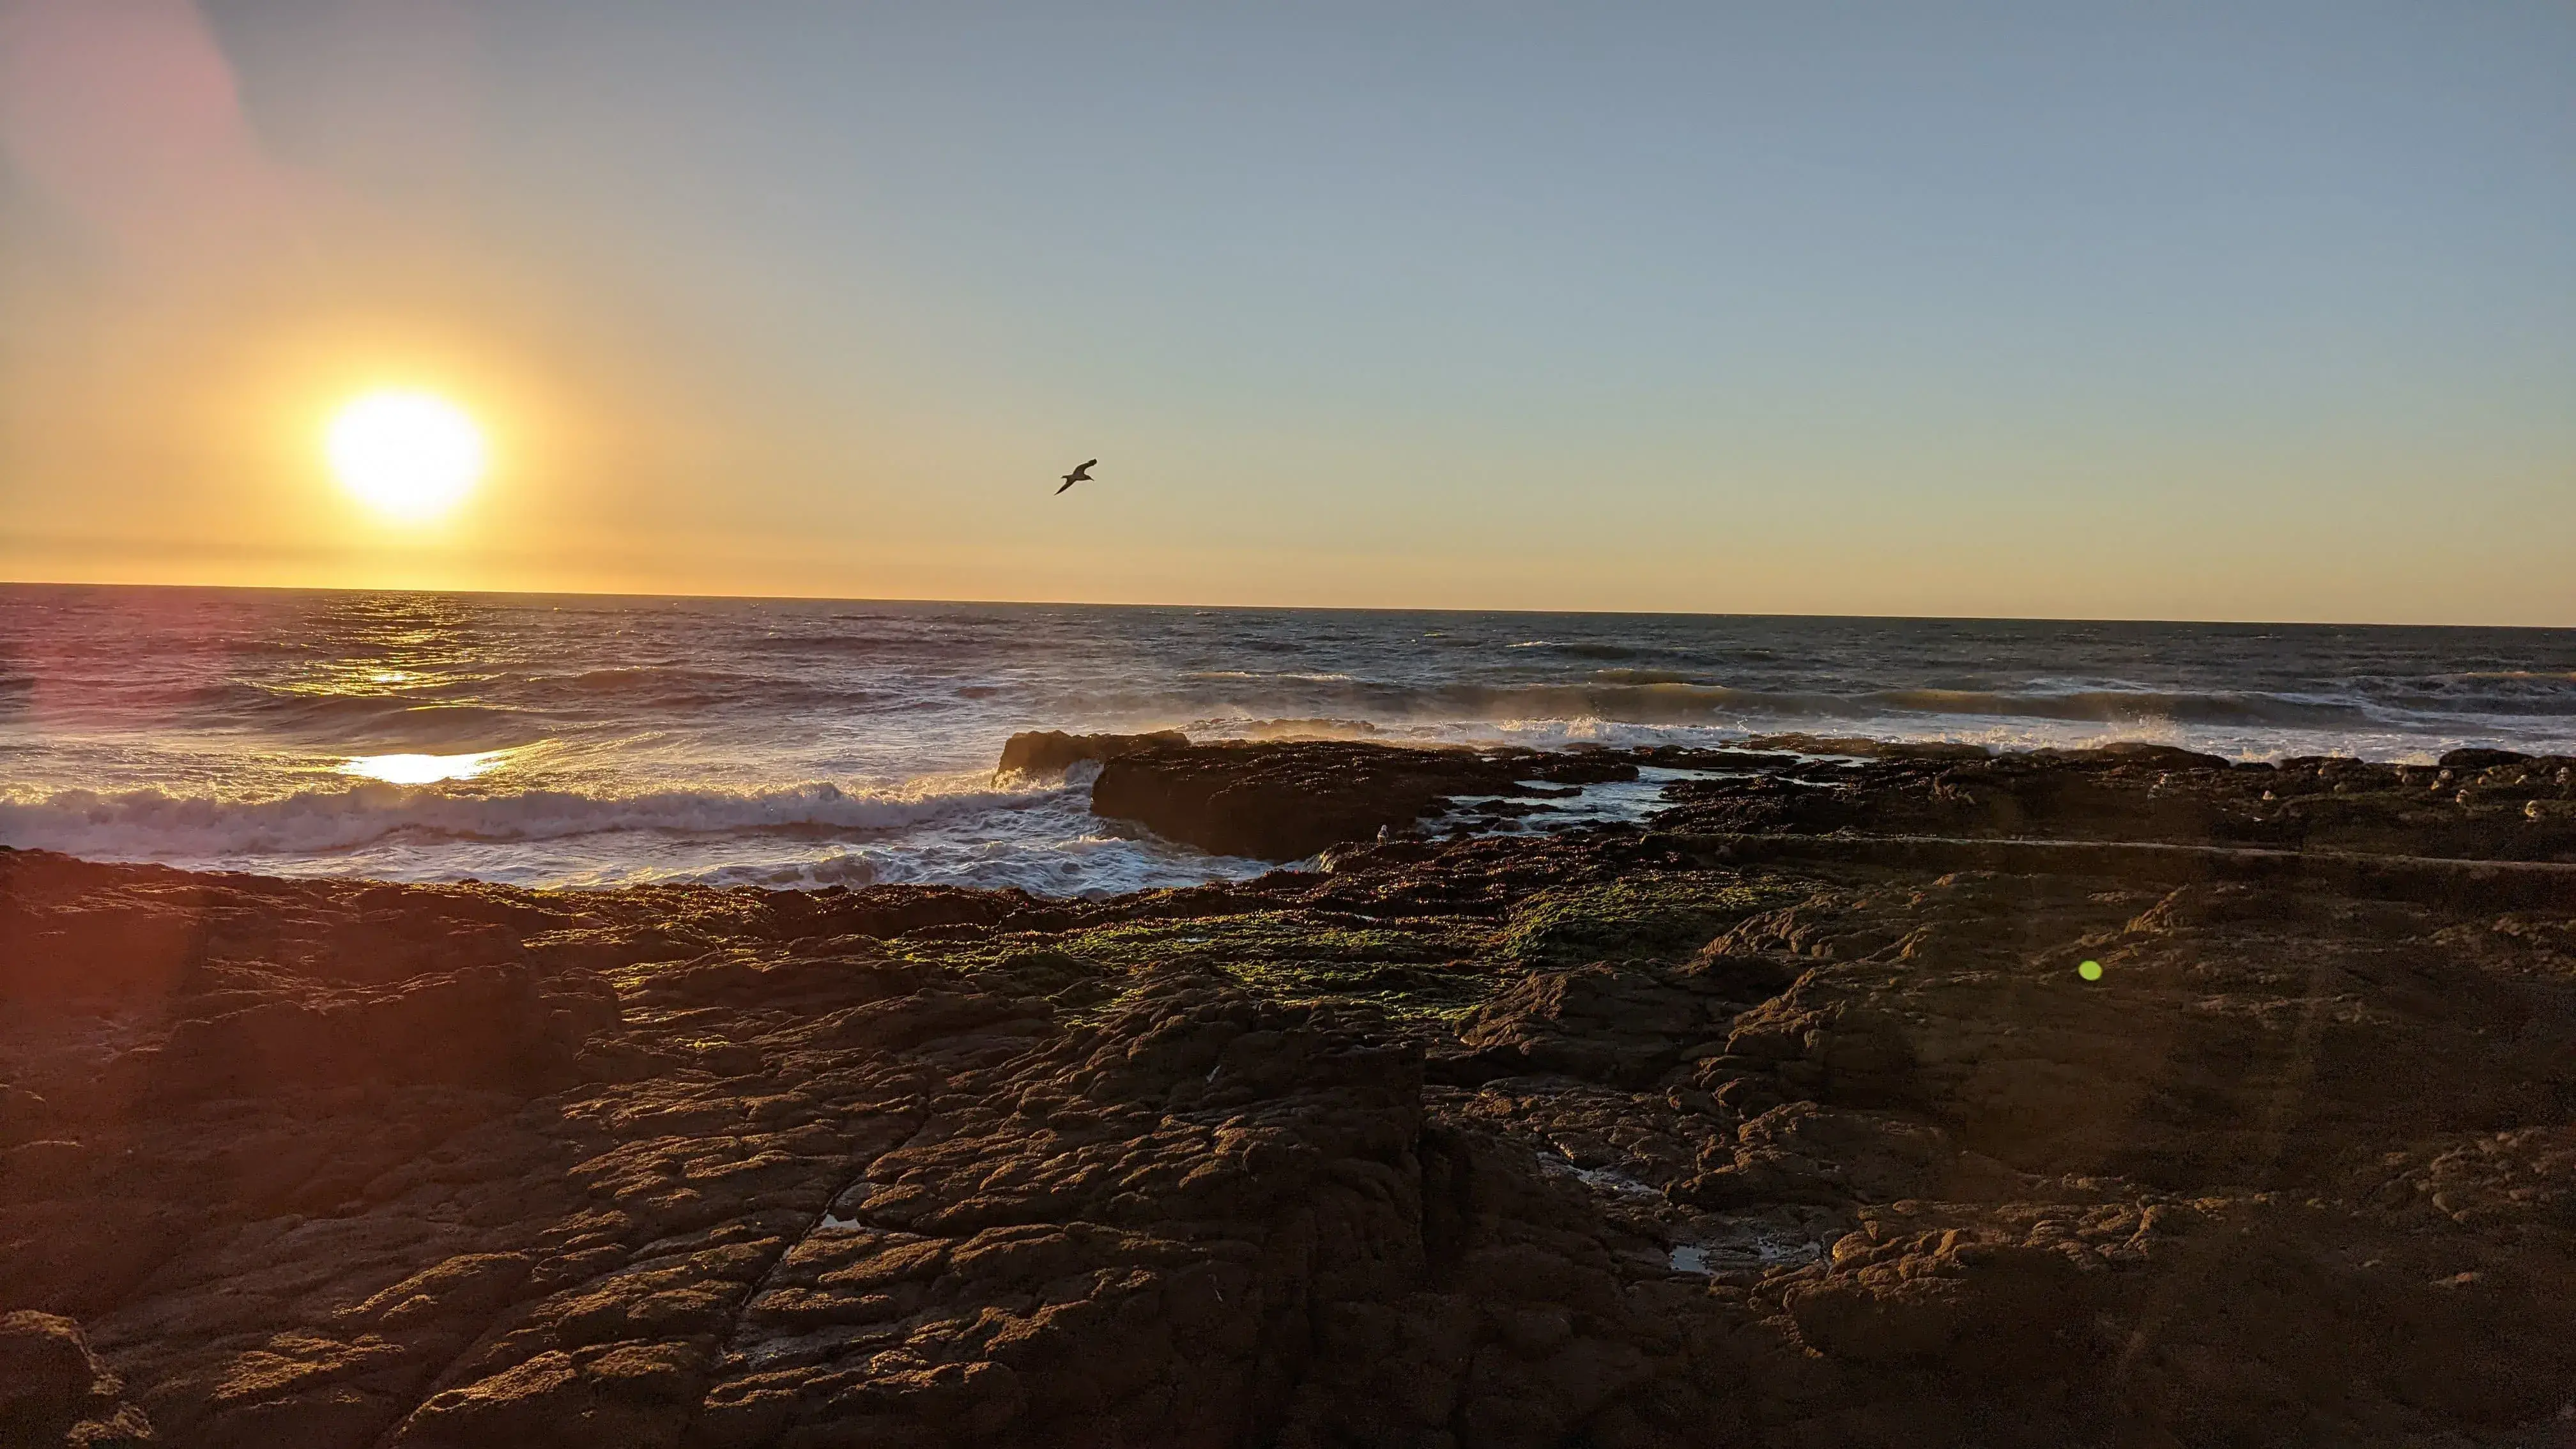 View from the windows of the main building of the Santa Maria clinic: ocean, rocks, sunset, a seagull in the sky